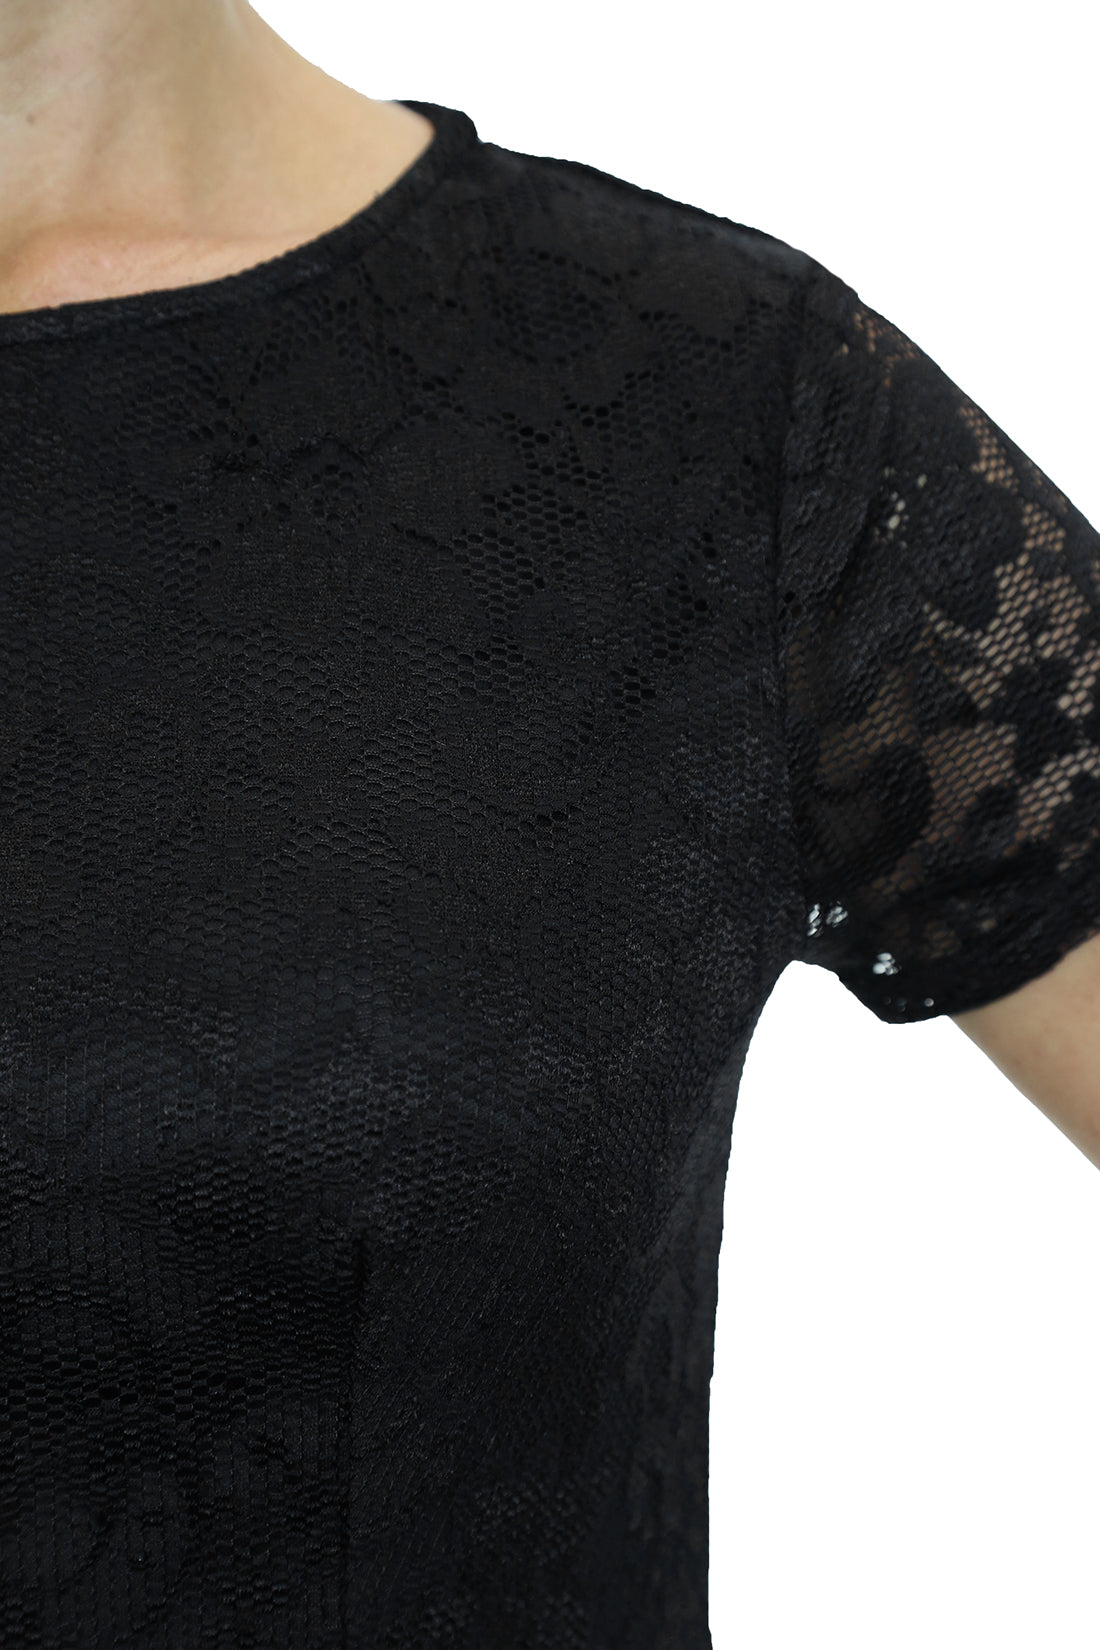 Stretch Lace Peplum Top Fully Lined Black